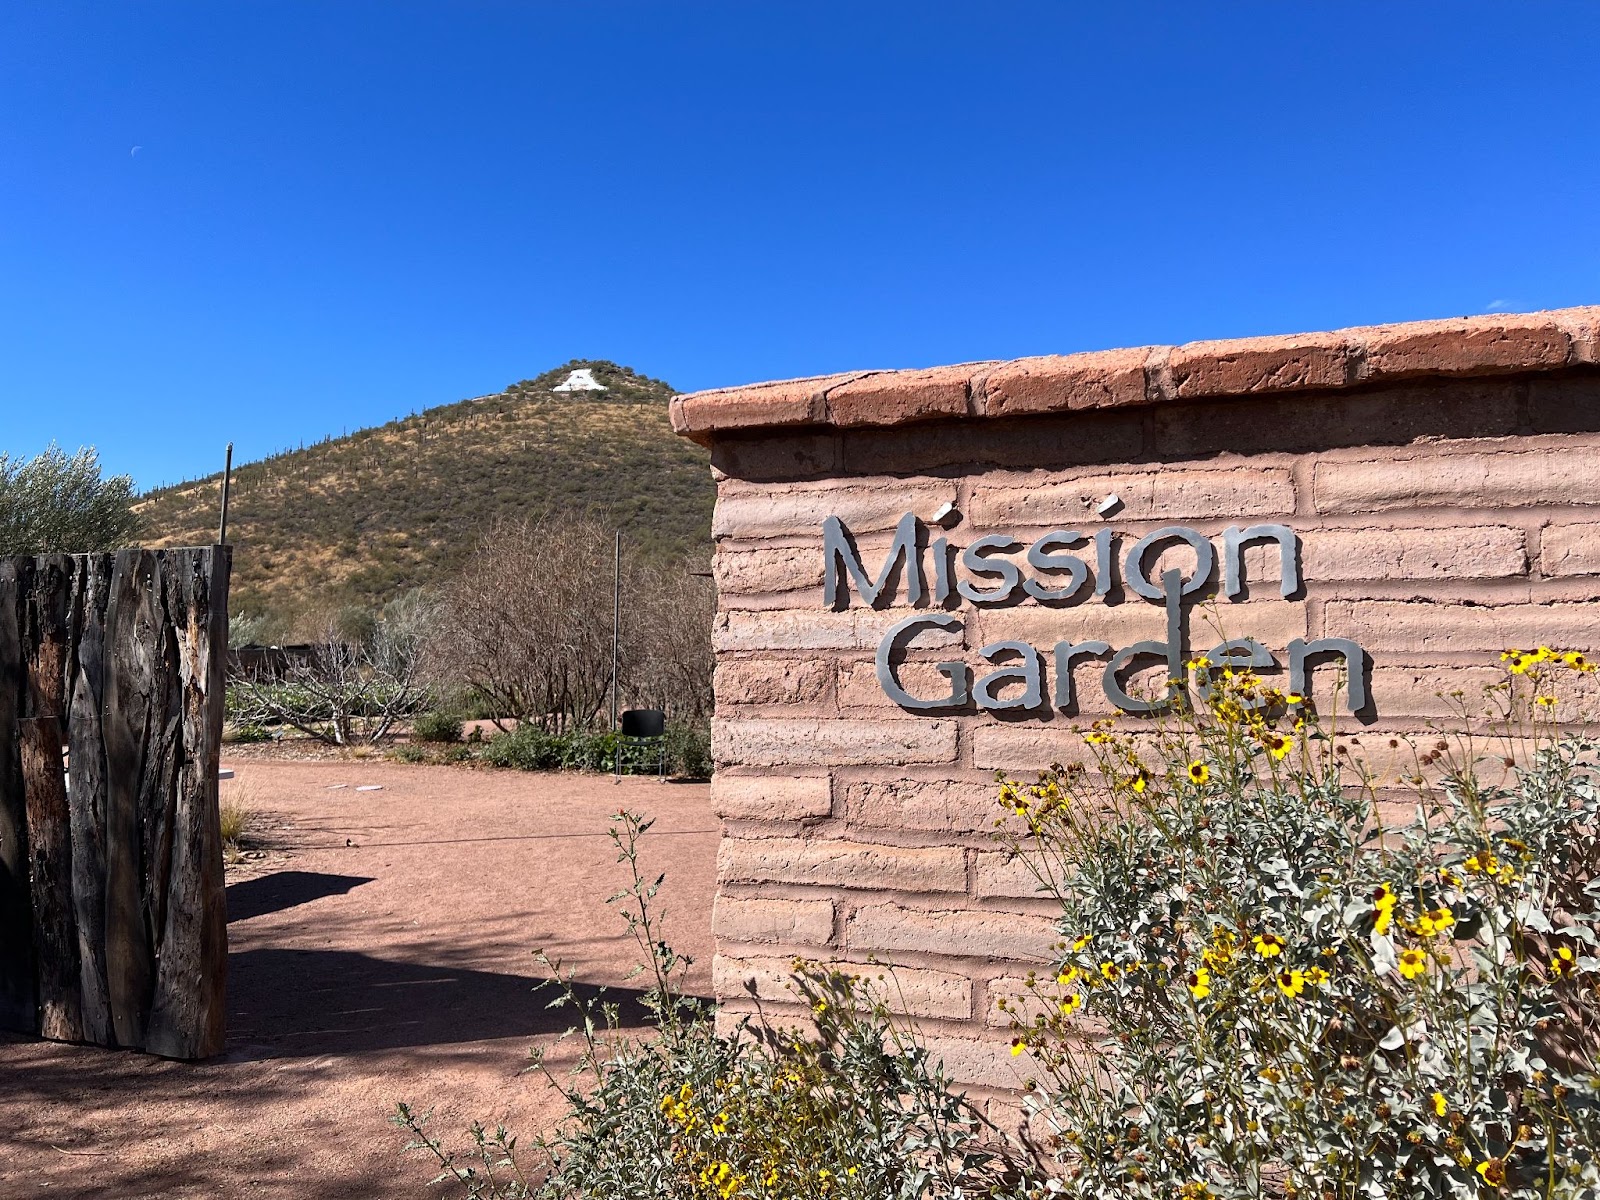 Text on a brick sign reads "Mission Garden"